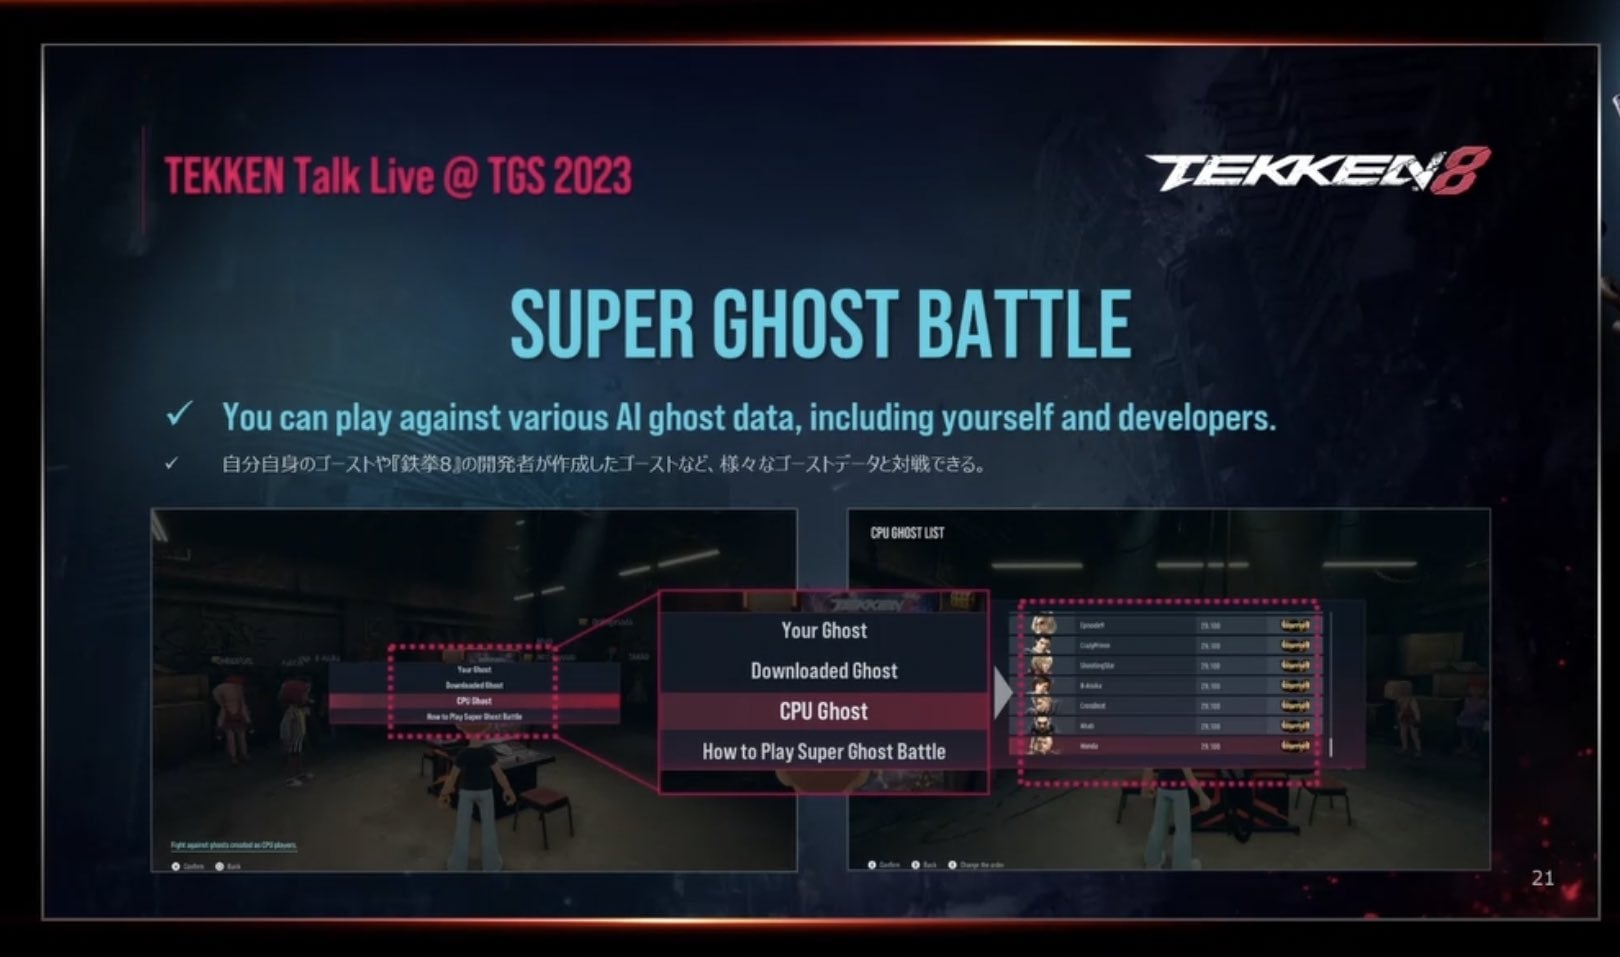 The details of the Super Ghost Battle mode, as shown during the Tekken Talk broadcast.